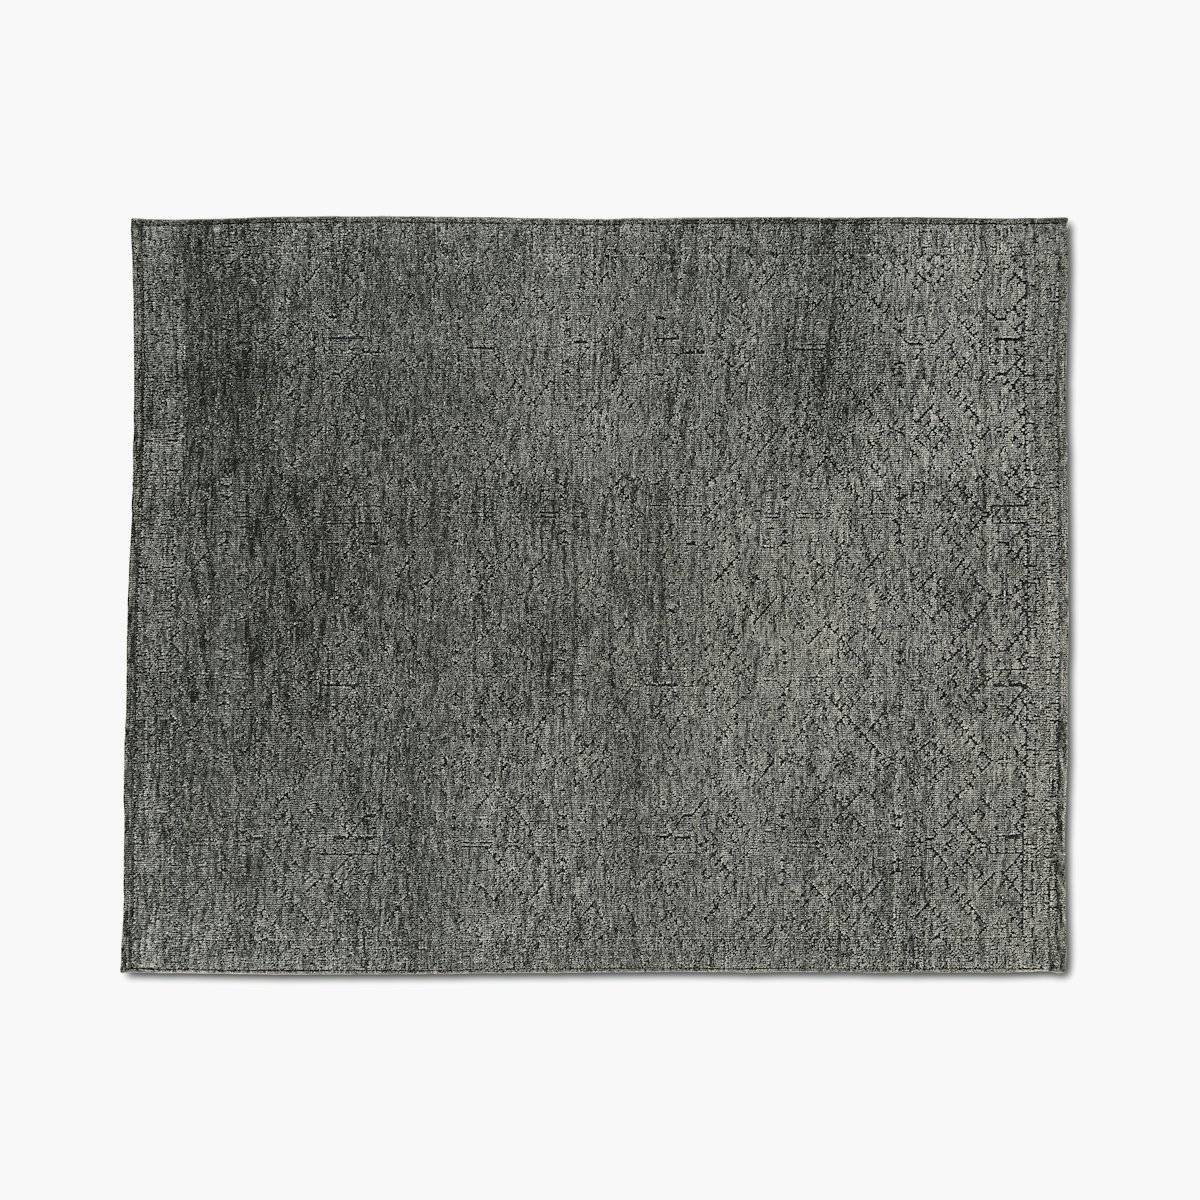 Dalve Handknotted Wool Rug